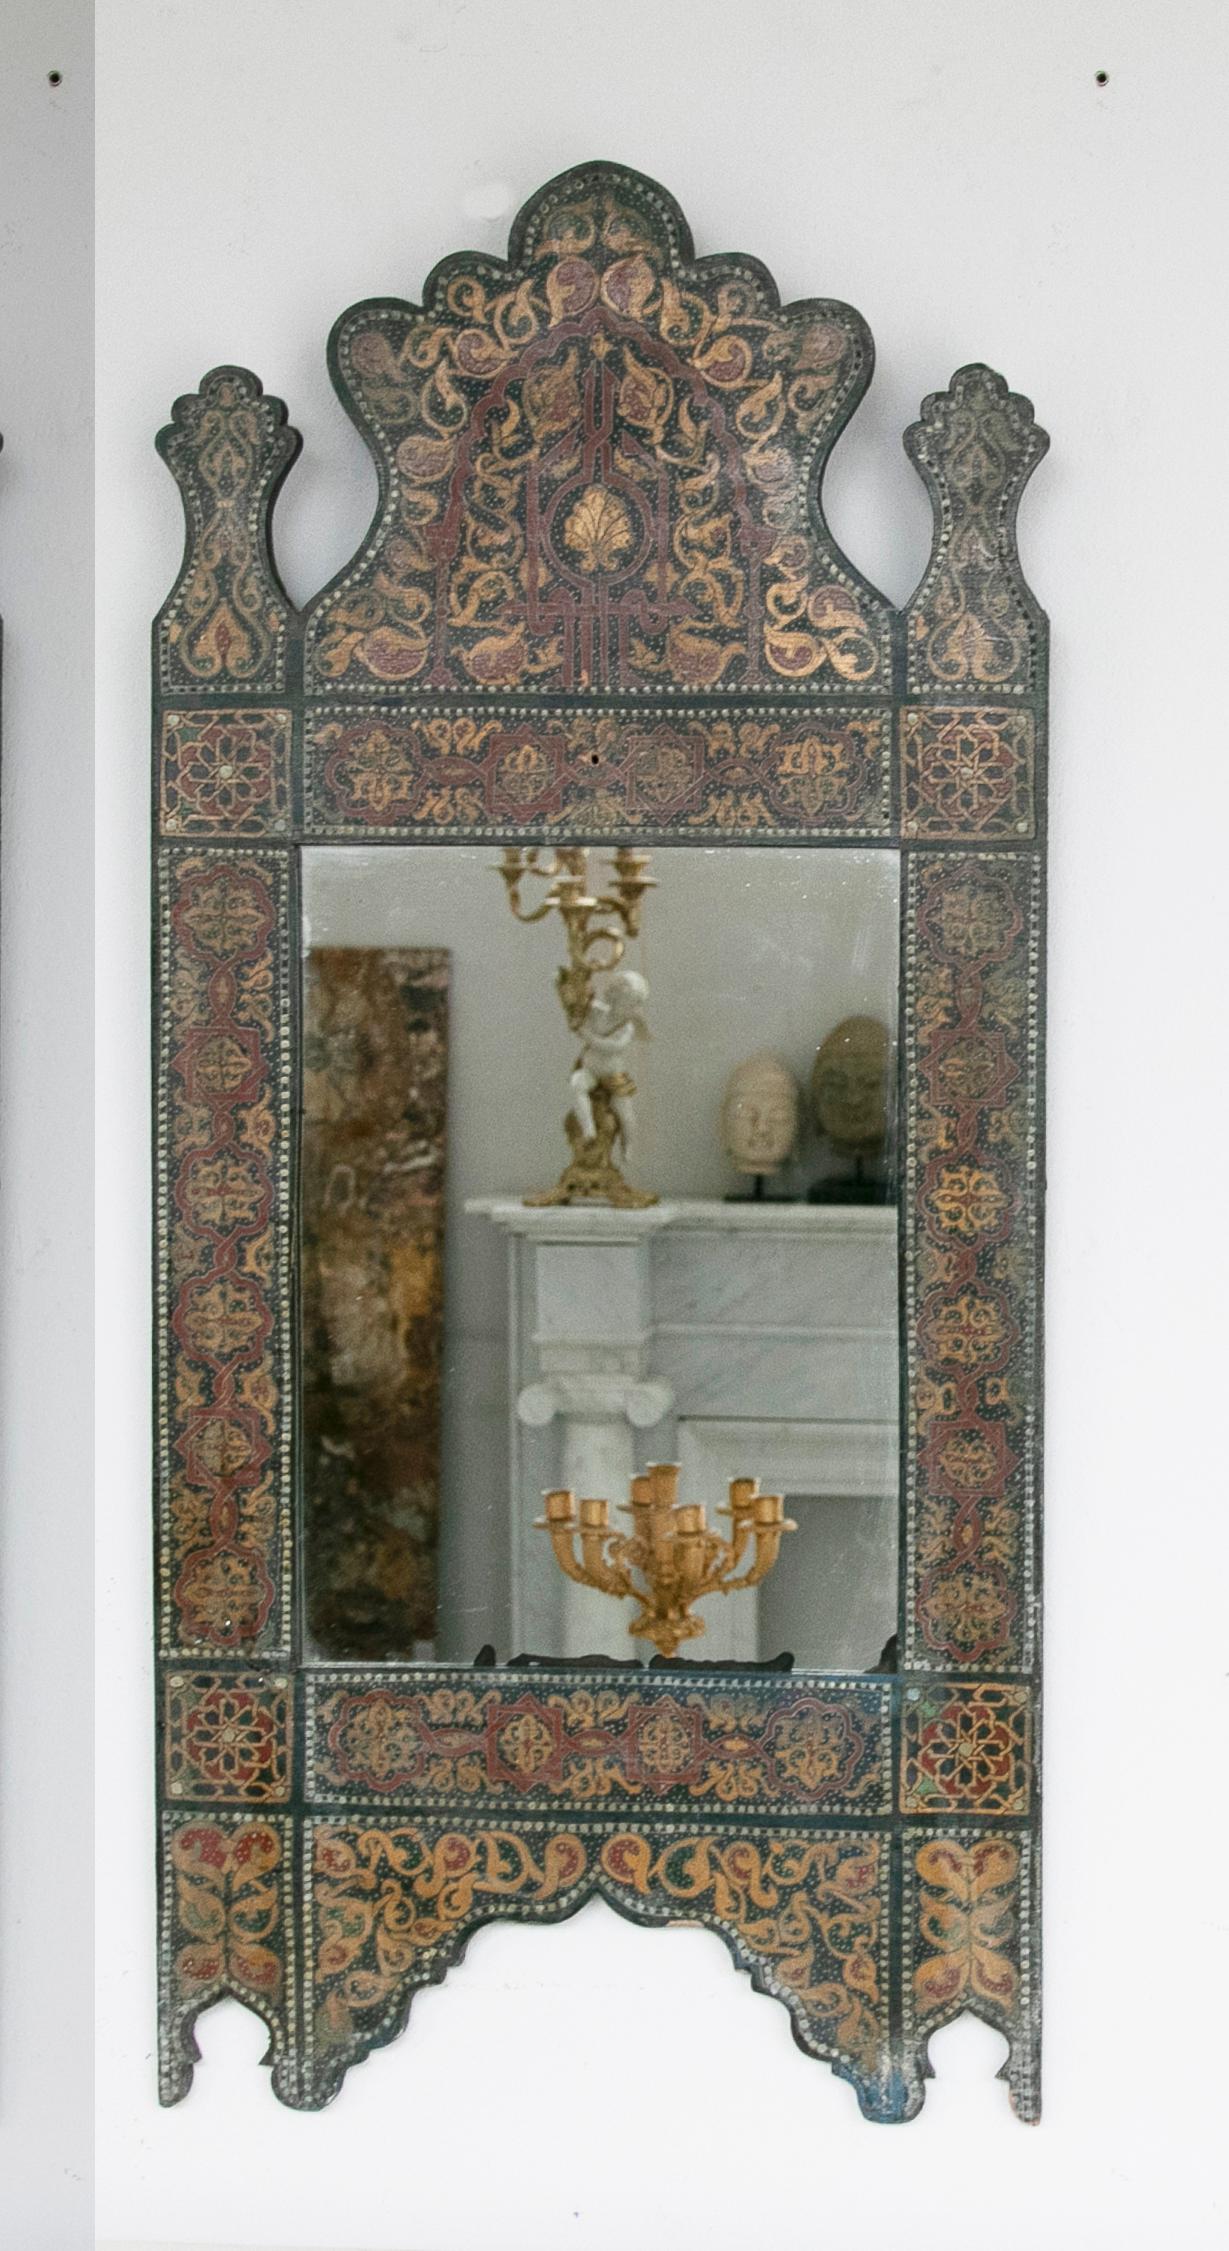 Pair of 1990s Handpainted moroccan style wooden mirror with arabic decorations. It has a reddish patina.